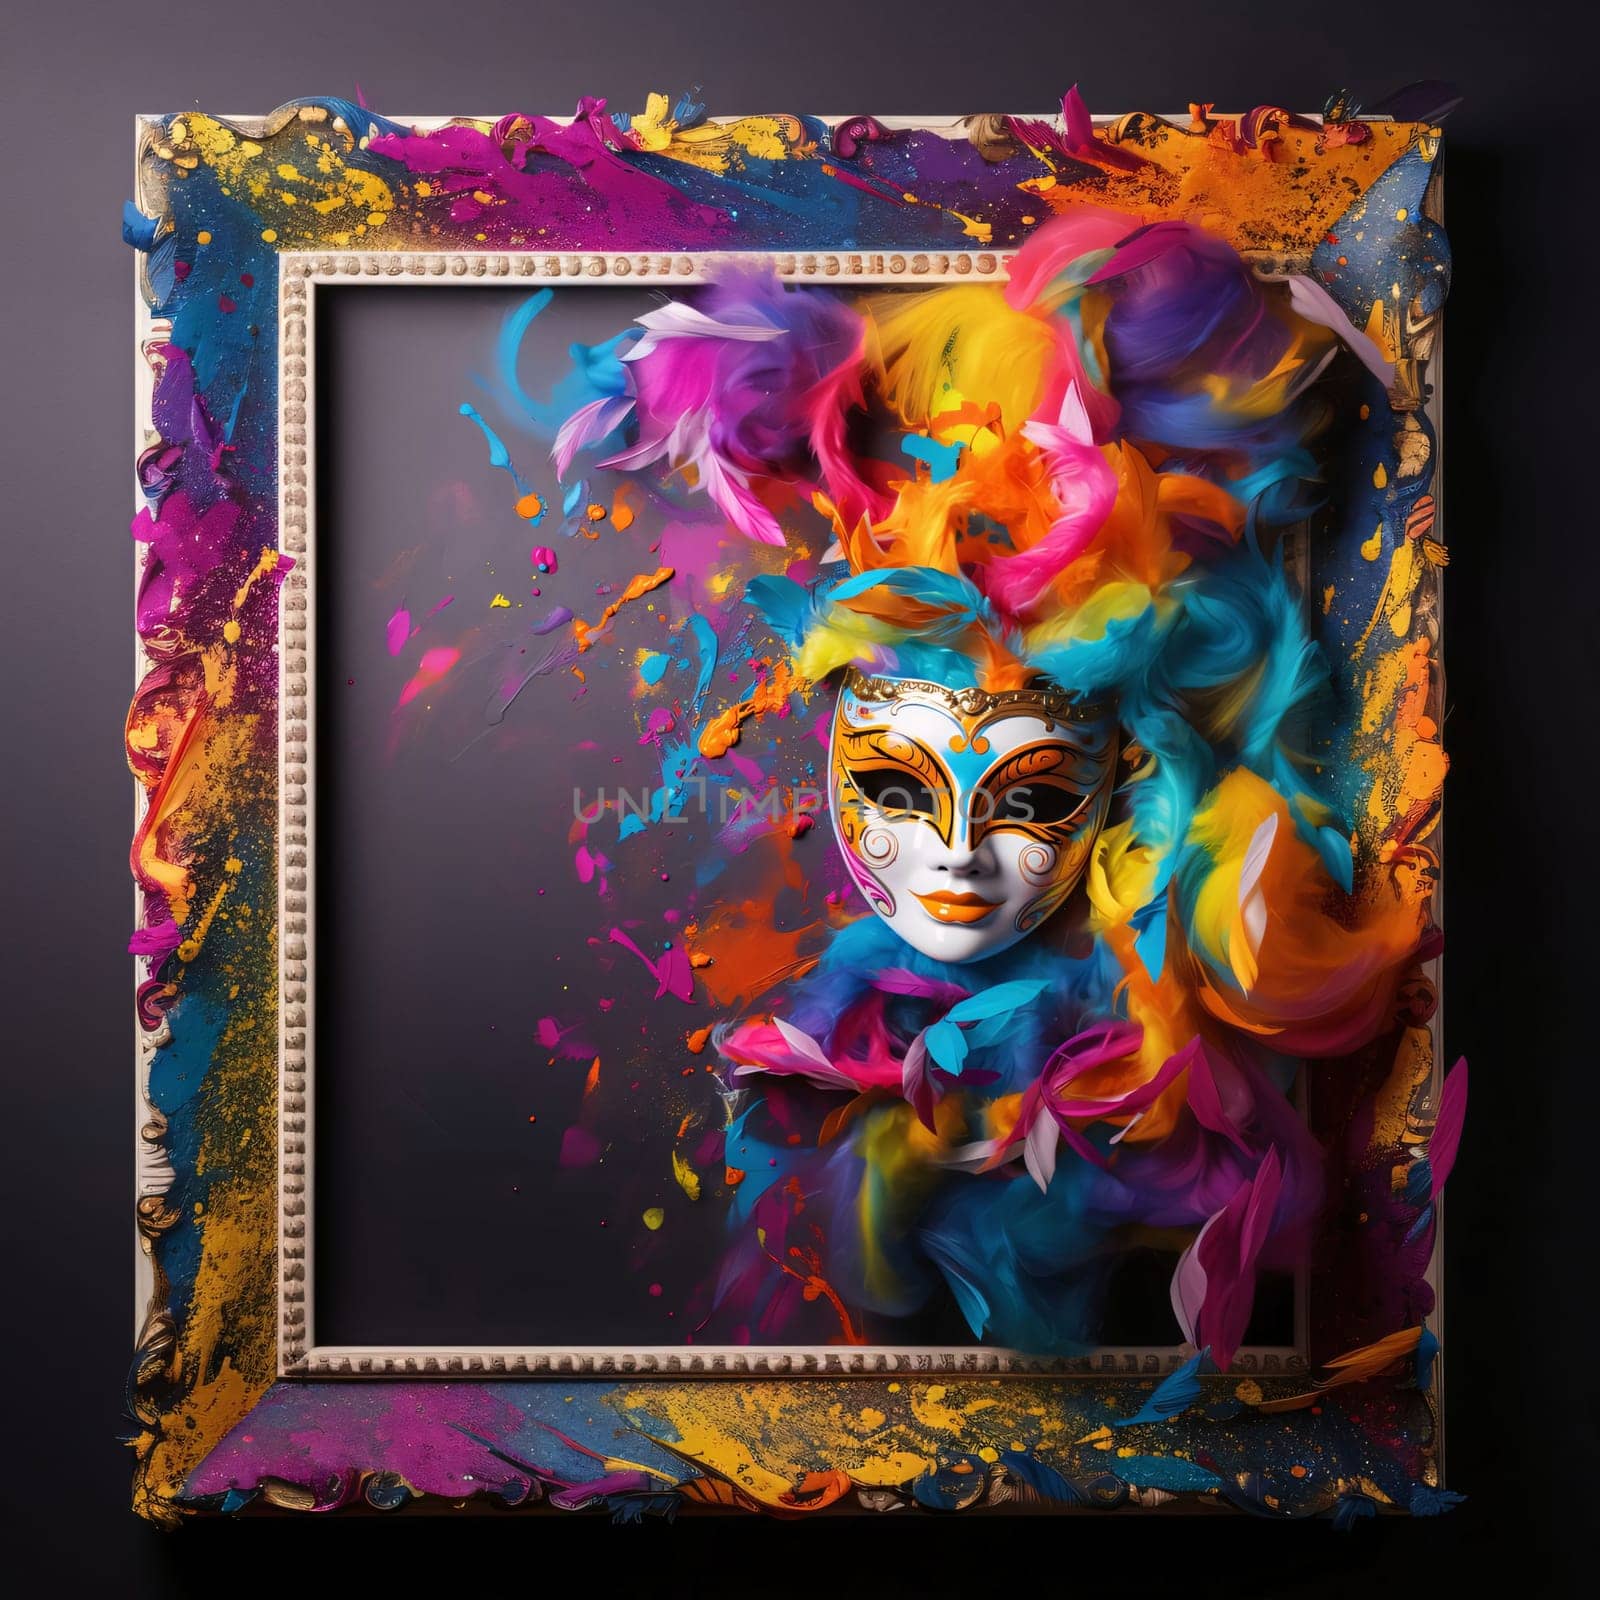 Carnival mask decorated with colorful rainbow ornaments, feathers on a dark background, to about space for your own content. Carnival outfits, masks and decorations. A time of fun and celebration before the fast.